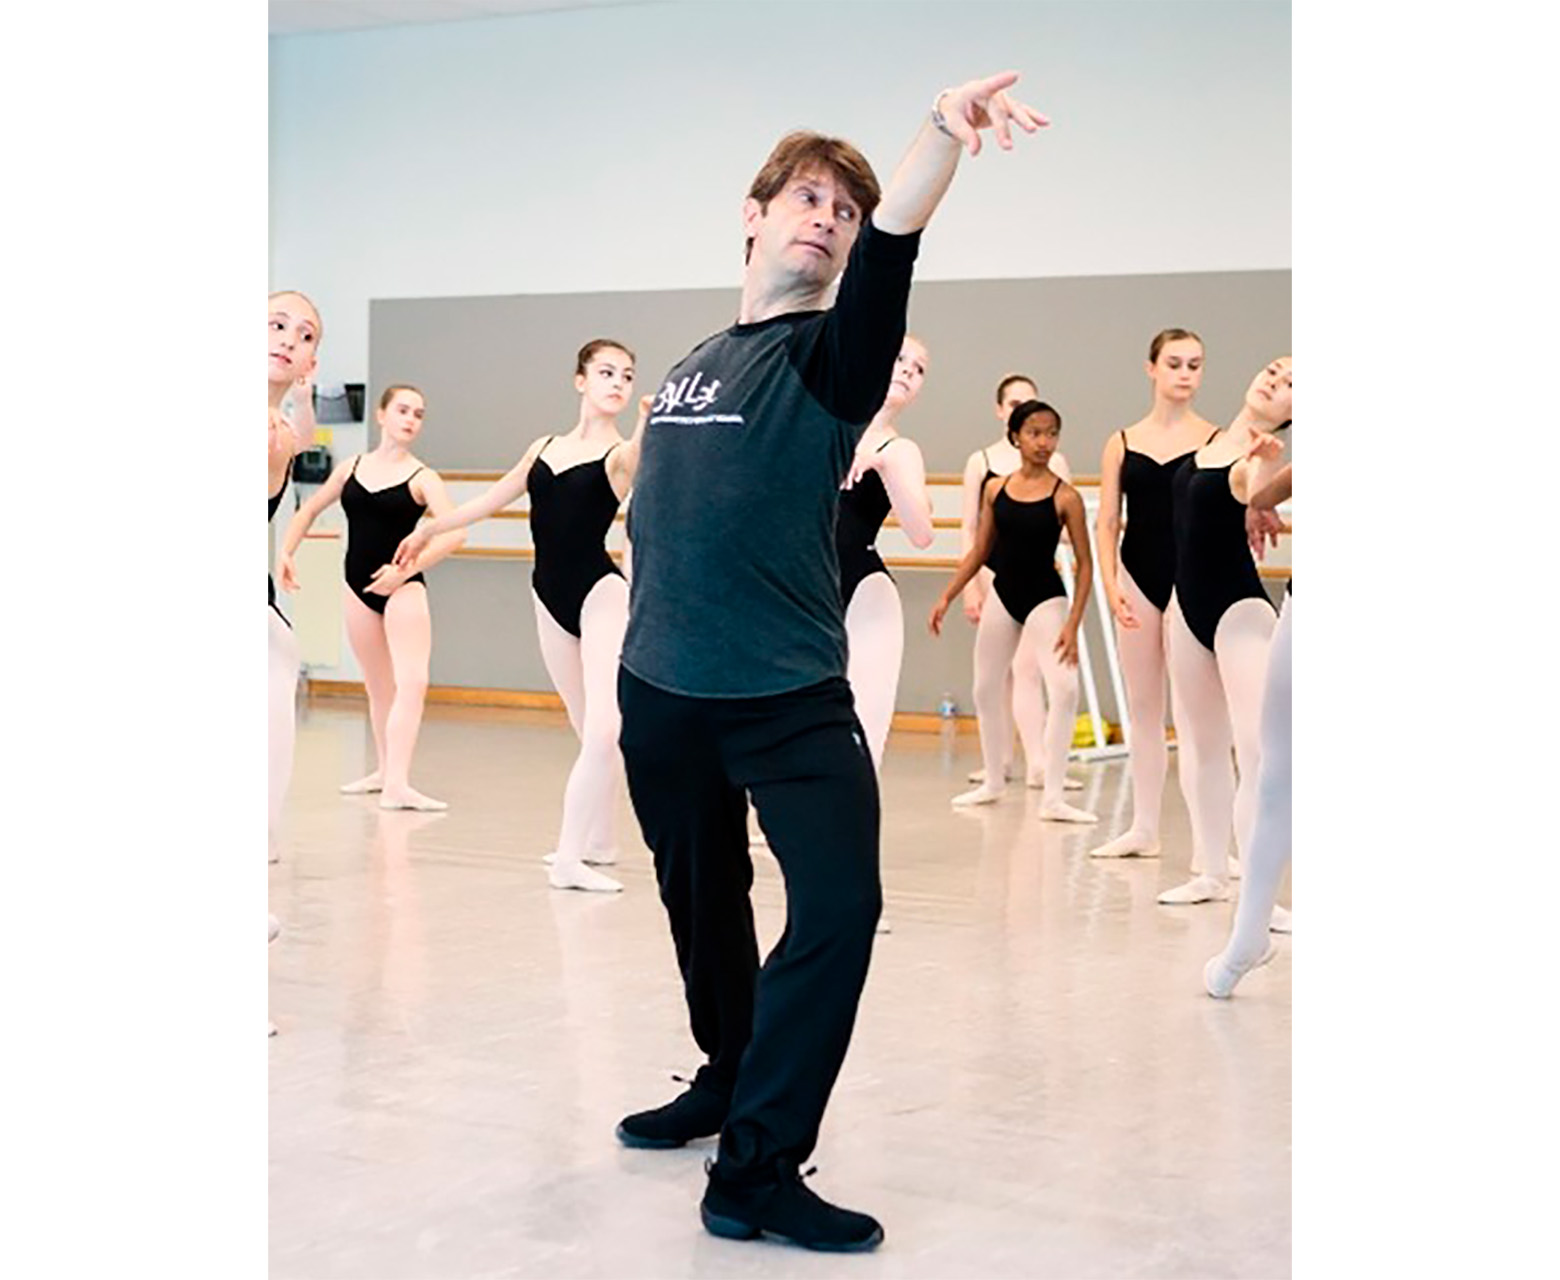 Patrick Armand demonstrates for a ballet class. He is in a fourth position lunge, downstage arm reaching long over his front leg, head inclined toward the front of the room as he illustrates épaulement. He wears a San Francisco Ballet branded long sleeve shirt. Behind him, young dancers in black leotards and pink tights variously watch and copy him.